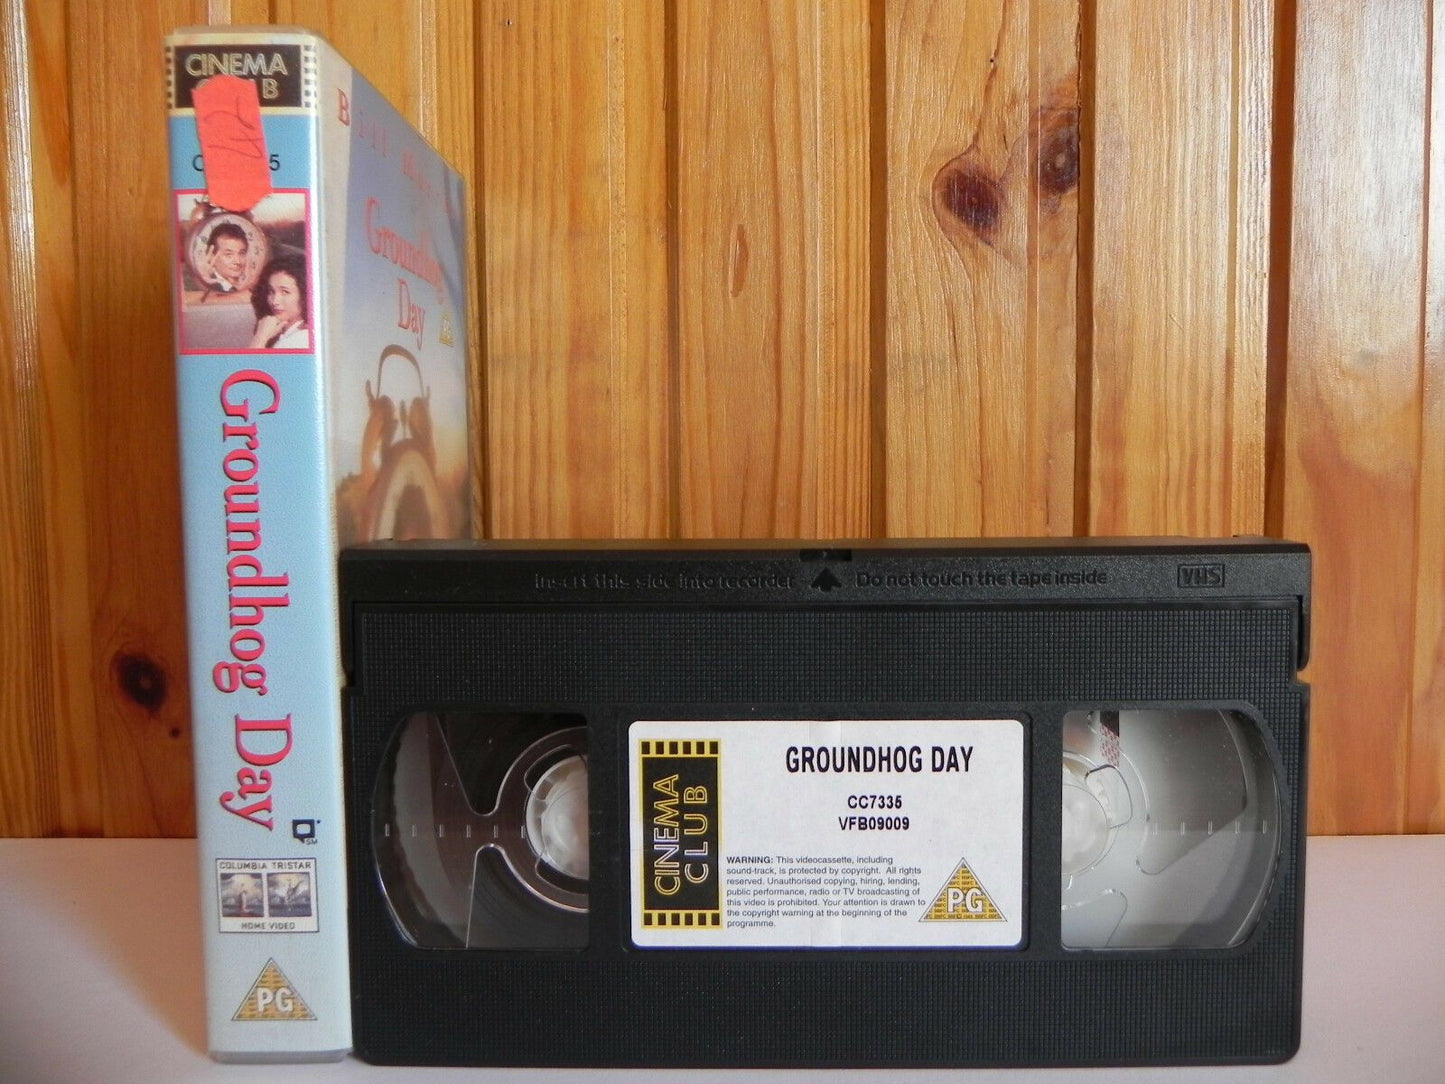 Groundhog Day: Bill Murray - Cult Smash - Time Warp Comedy - Andie MacDowell VHS-